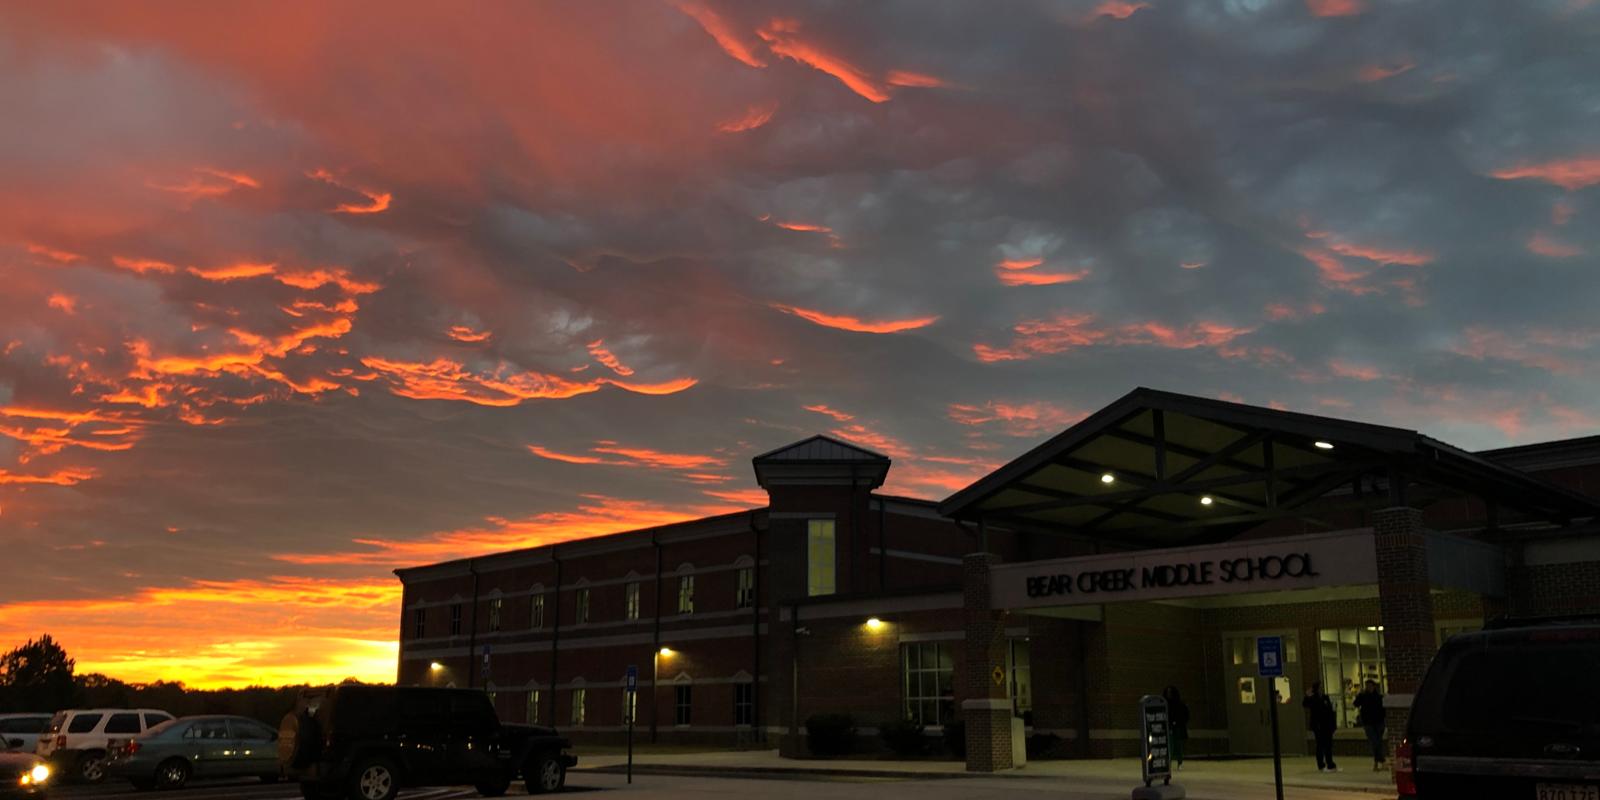 Picture of Bear Creek Middle School during sunrise